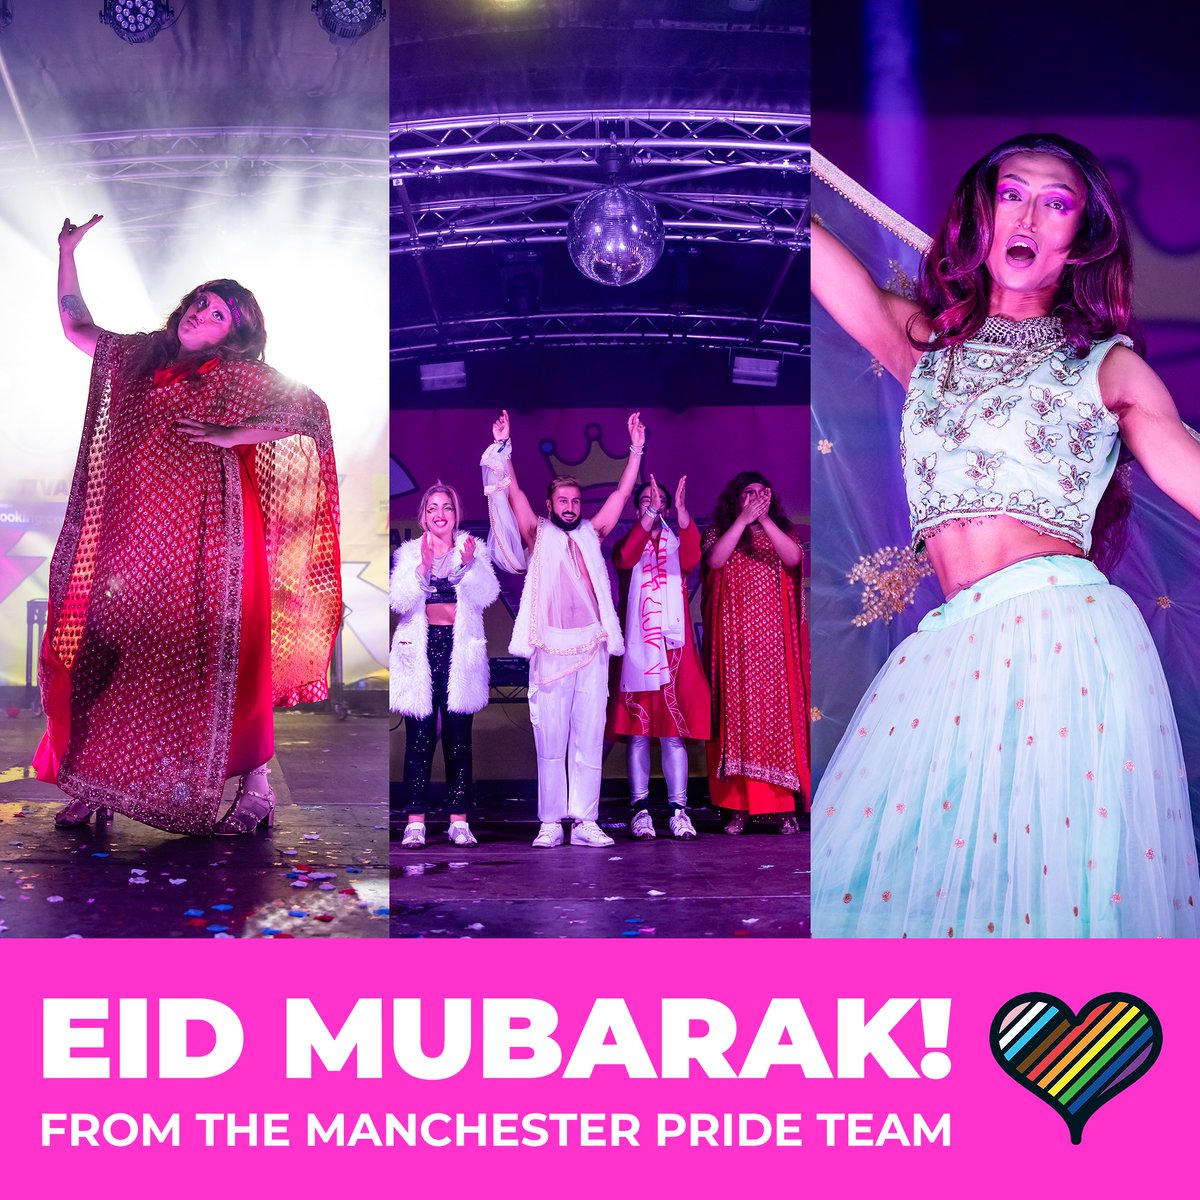 Eid Mubarak to all those who are celebrating Eid al-Fitr today! We hope you have a wonderful day filled with joy and compassion ❤️ 📸: Some gorgeous photos from our Queer Asian Takeover at the Gay Village Party last year 🌈